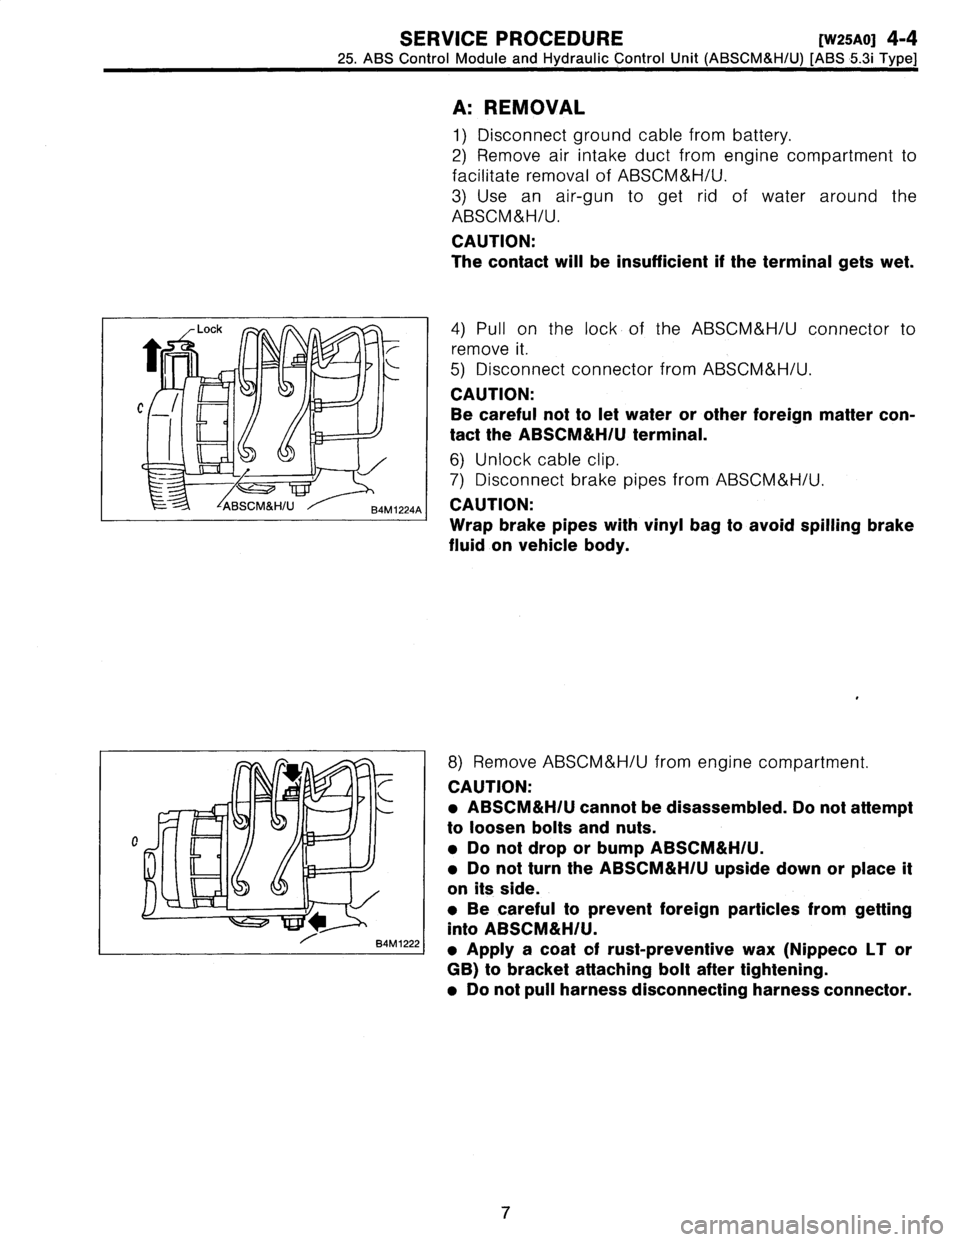 SUBARU LEGACY 1997  Service Repair Manual 
SERVICE
PROCEDURE
[w2sao1
4-4

25
.
ABS
Control
Module
and
Hydraulic
Control
Unit
(ABSCM&H/U)
[ABS
5
.3i
Type]

A
:
REMOVAL

1)
Disconnect
ground
cablefrom
battery
.

2)
Remove
air
intake
duct
fromen